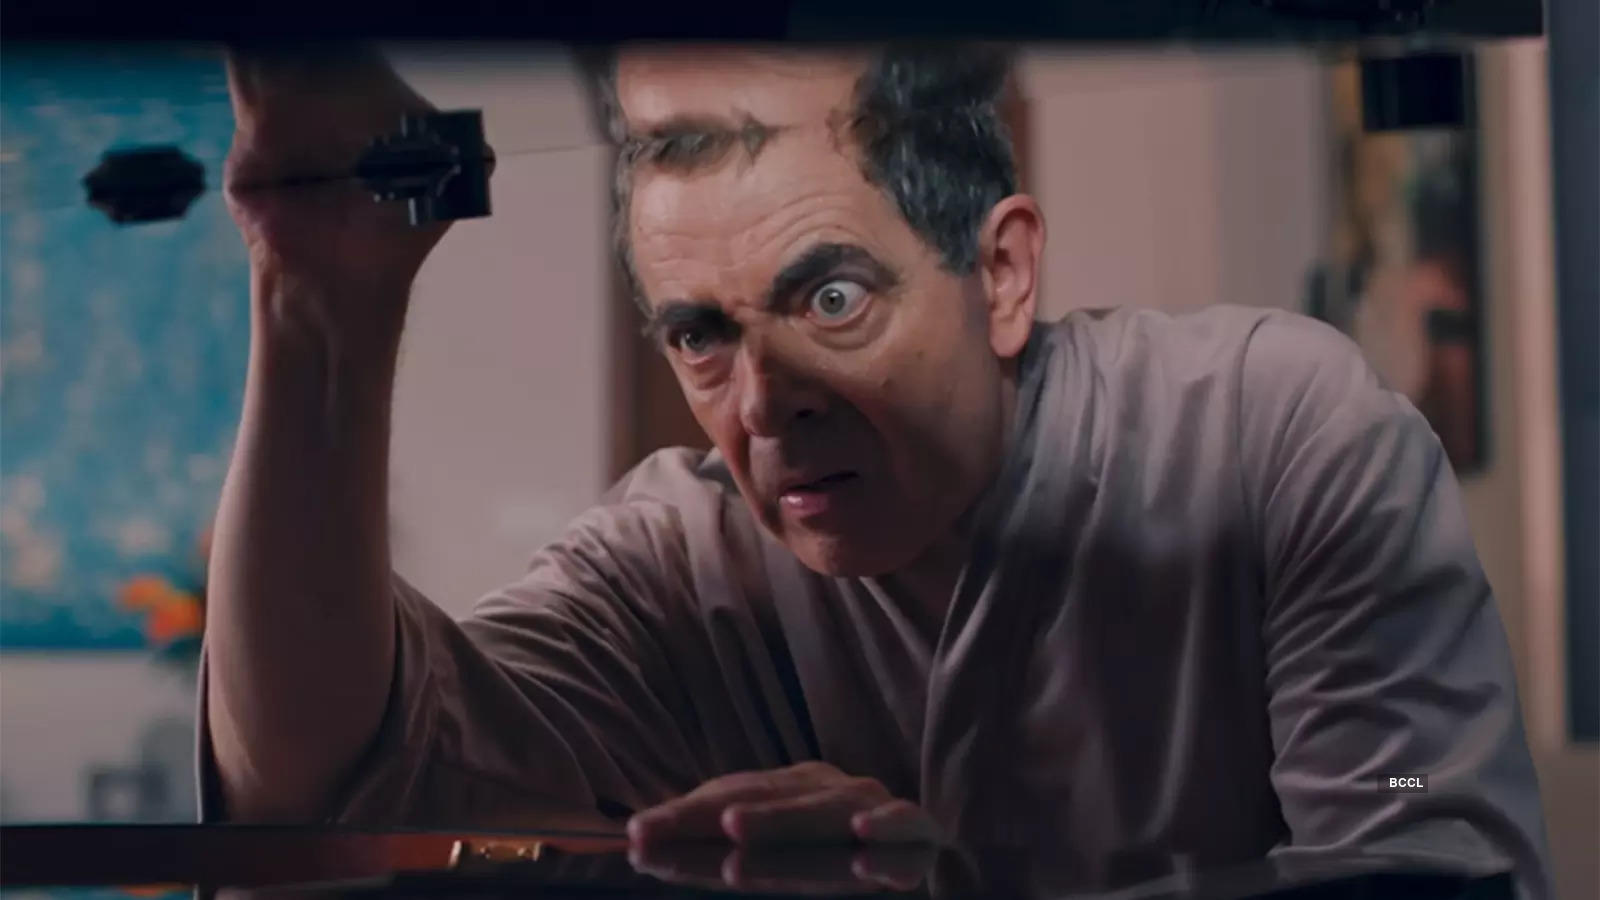 Man Vs Bee Season 1 Review: Rowan Atkinson's latest comedy is an odd show and not a funny show